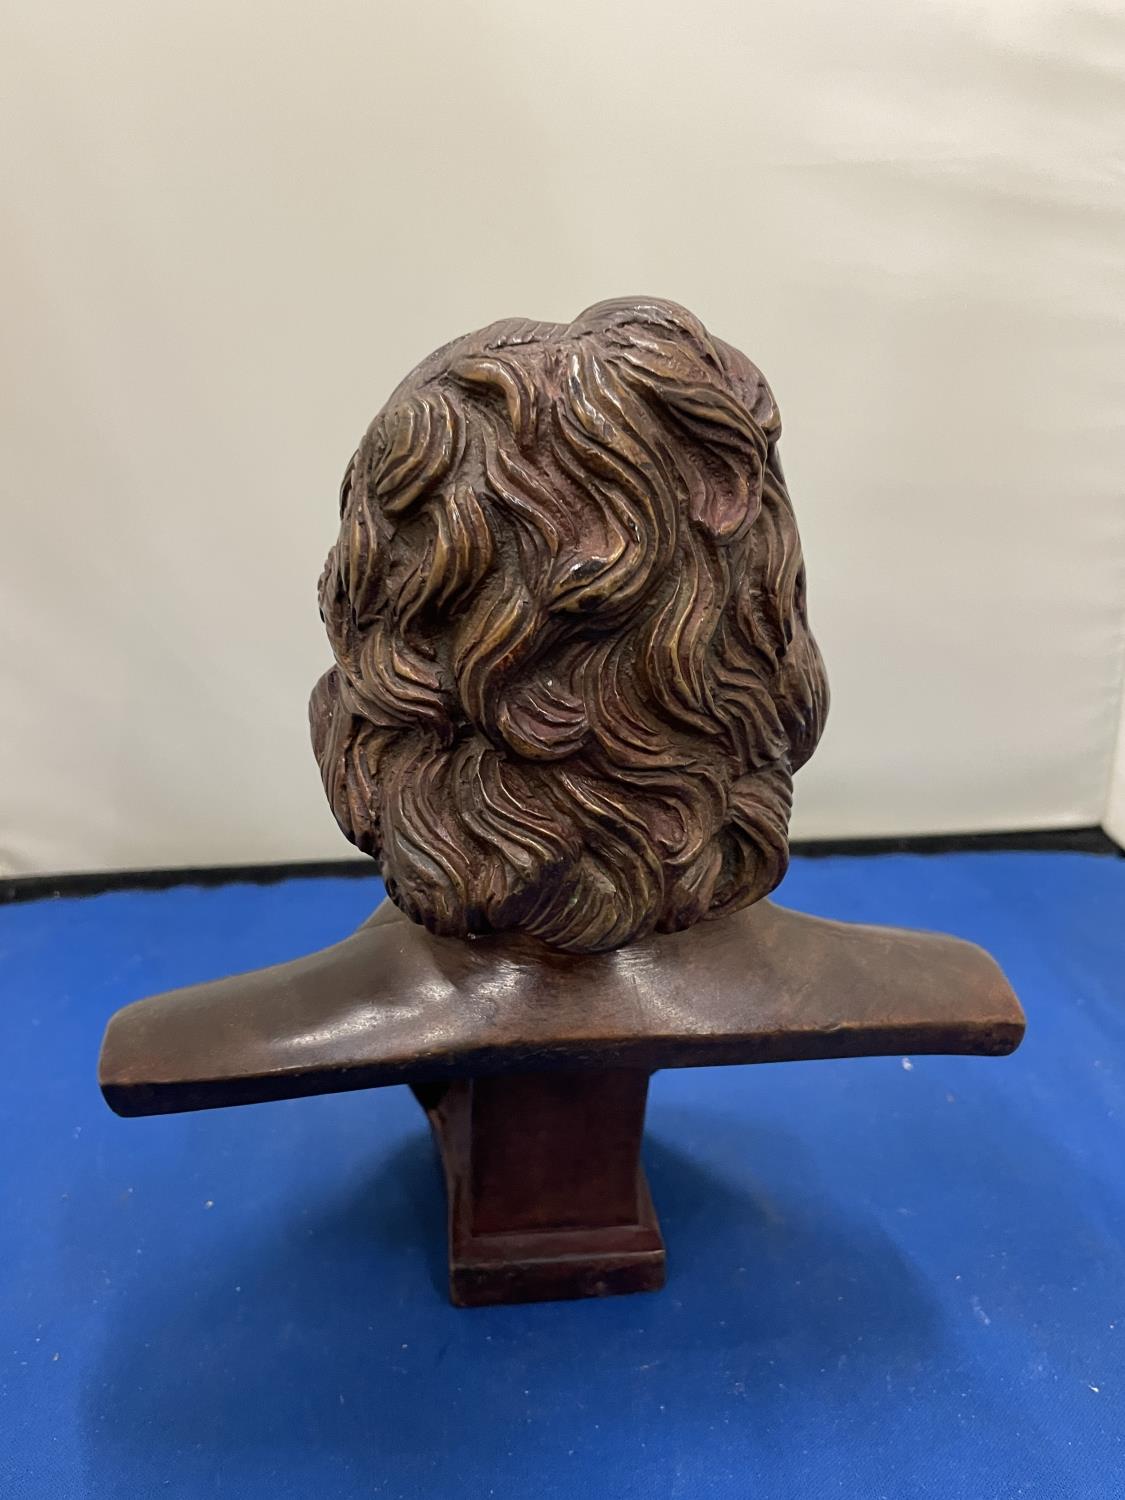 A BRONZE BUST OF BEETHOVEN - Image 6 of 8